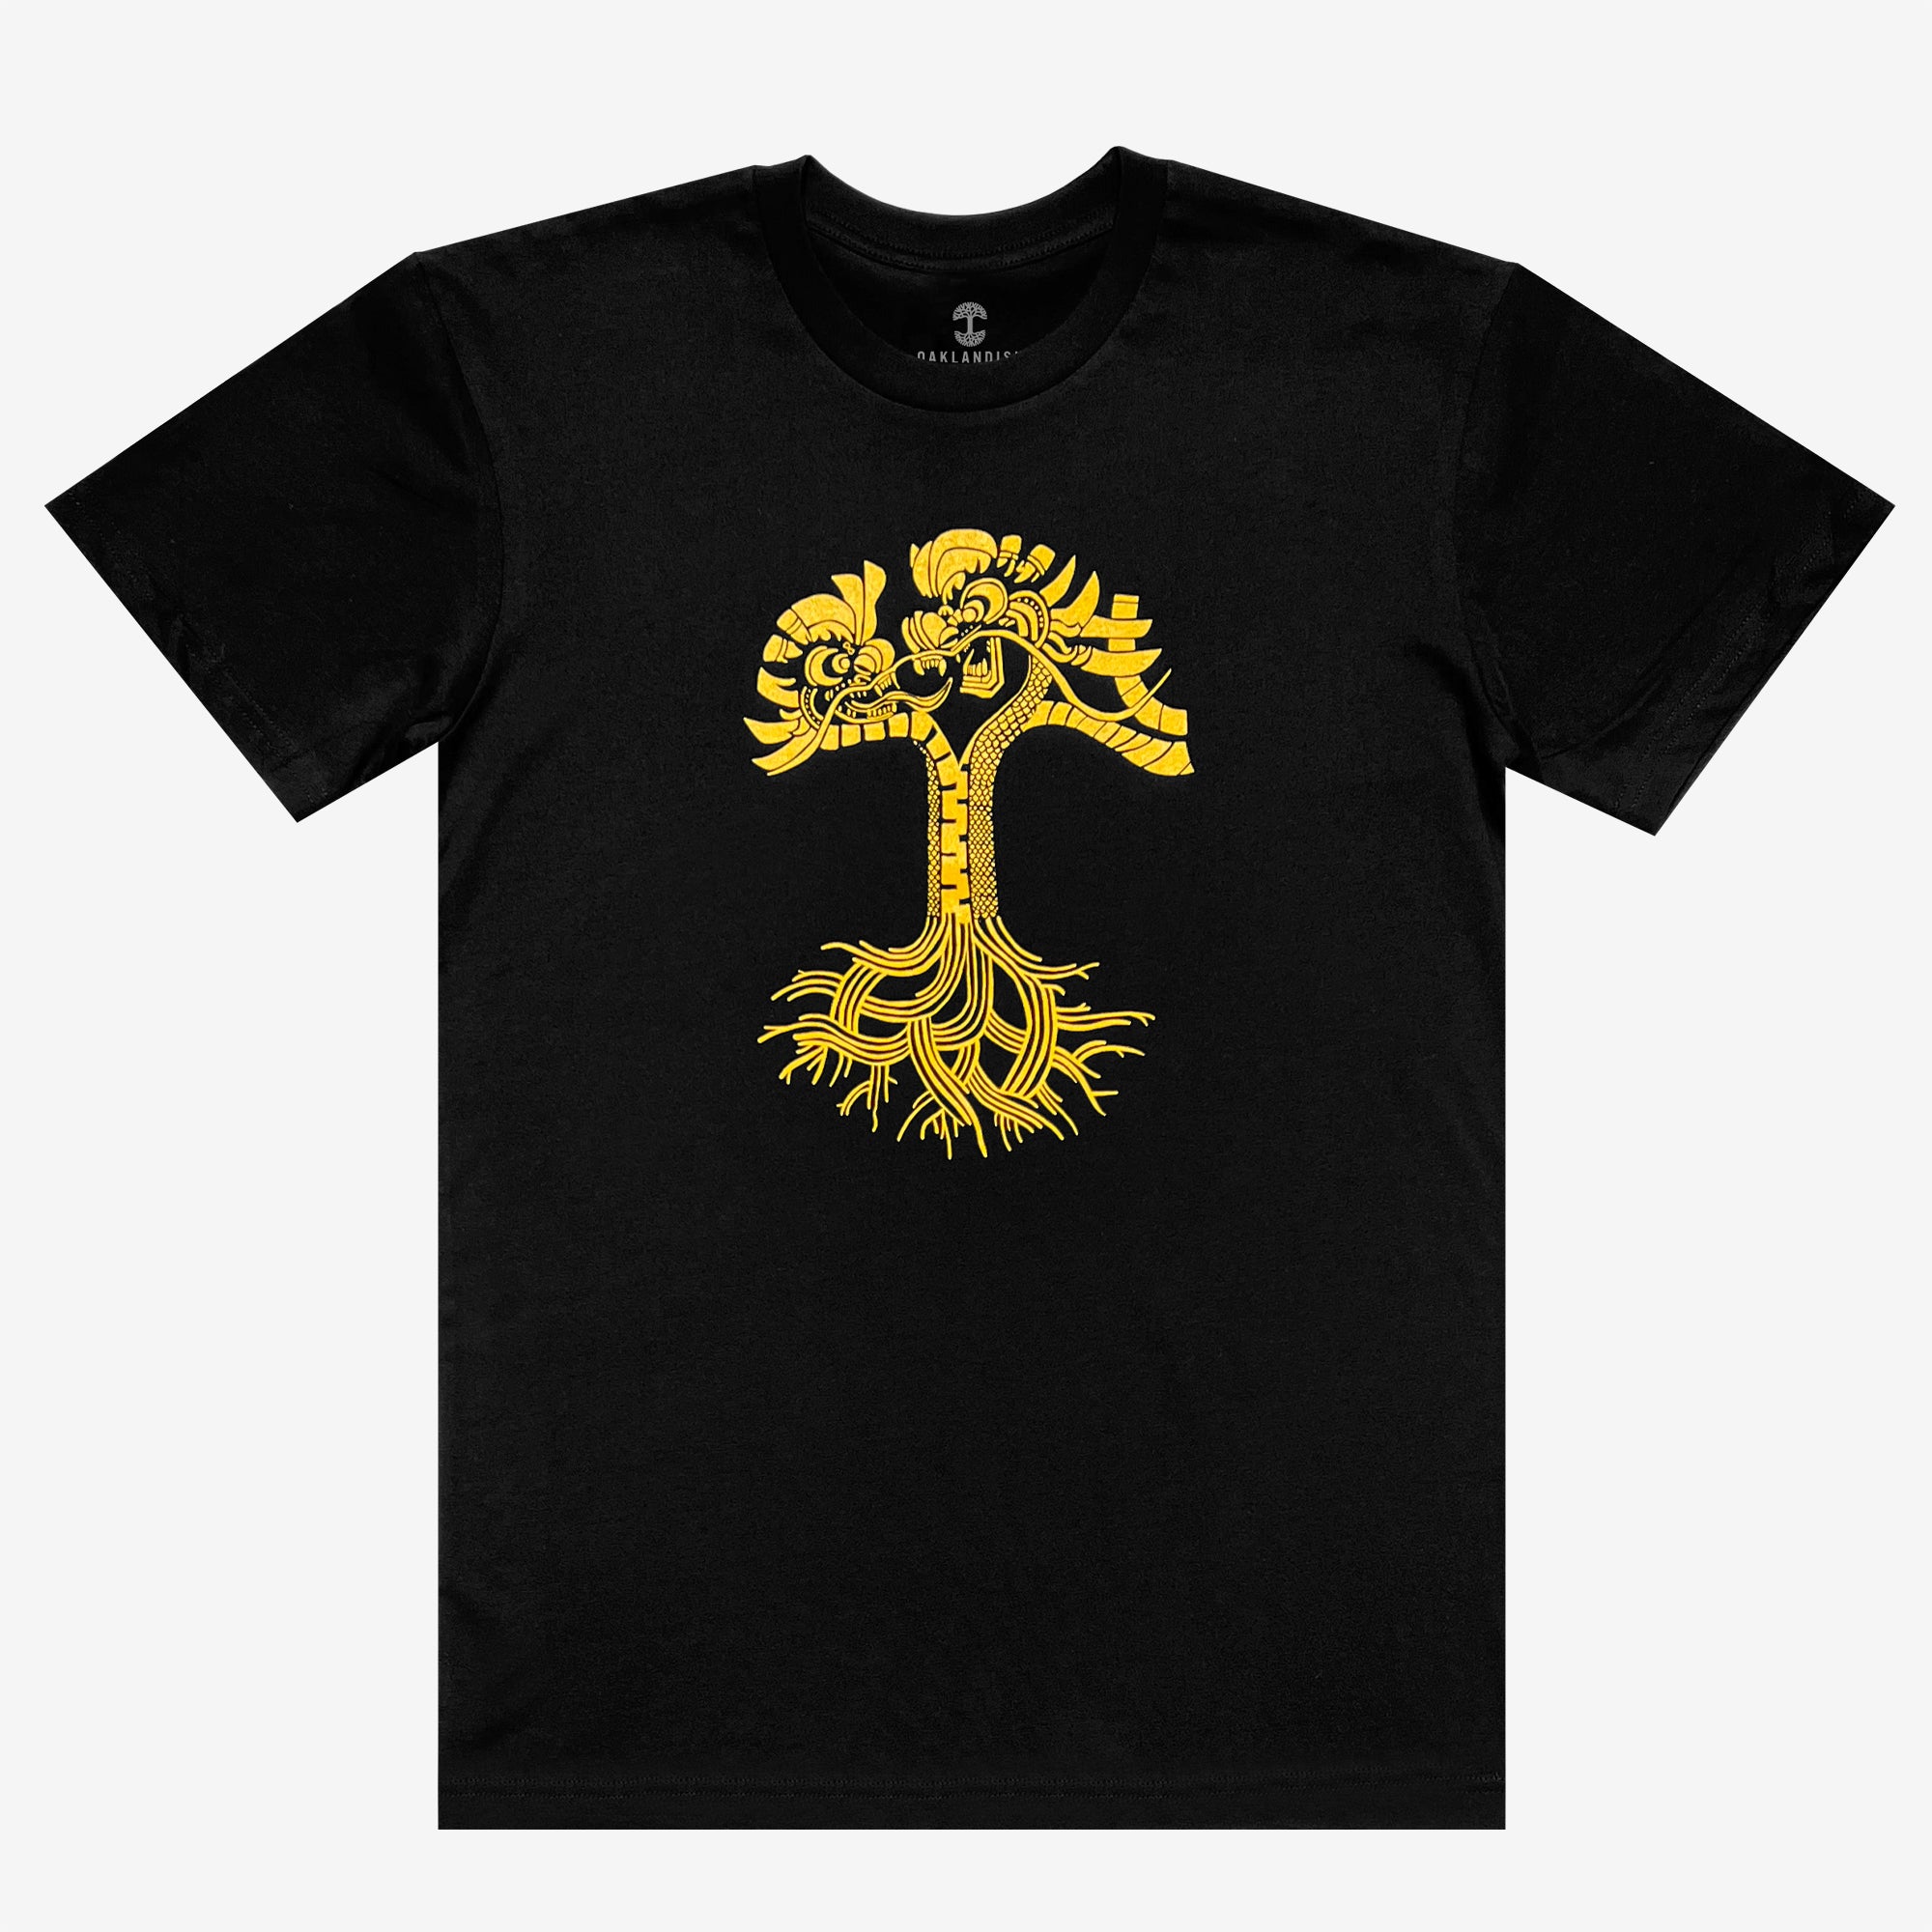 Black t-shirt with gold dragon power graphic design in the shape of an Oaklandish tree logo. 